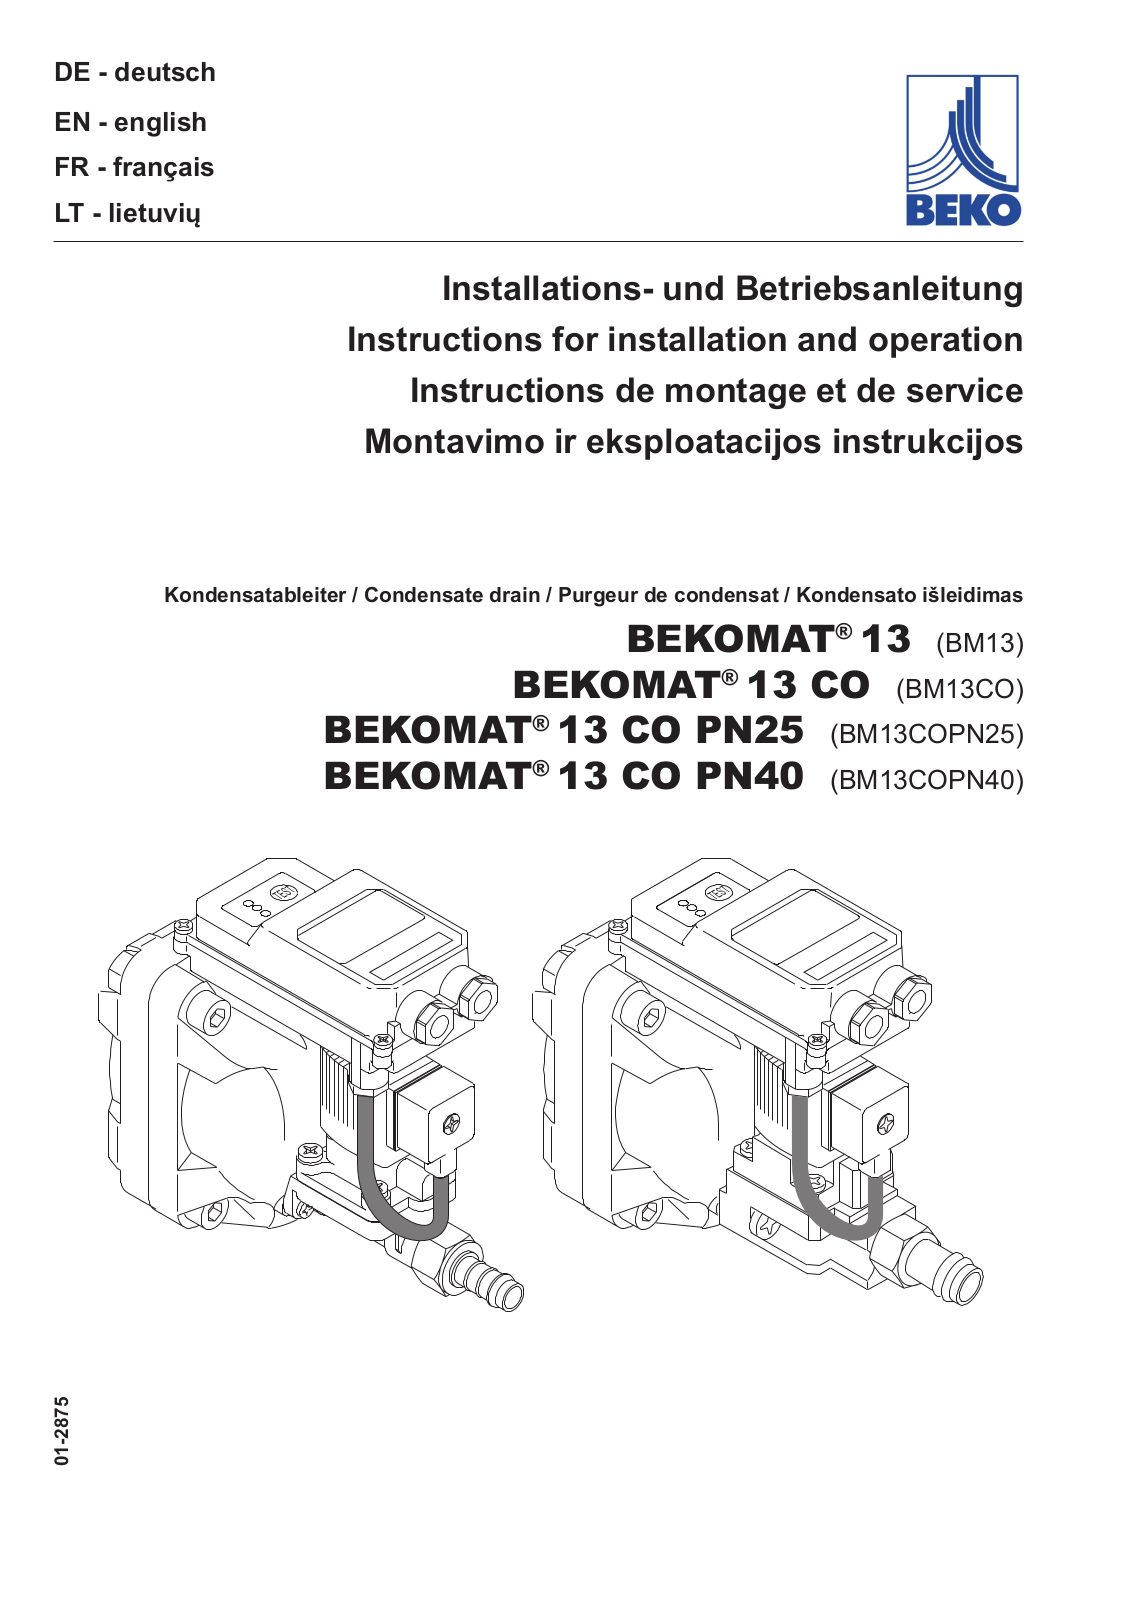 Beko BEKOMAT 13, BEKOMAT 13 CO, BEKOMAT 13 CO PN25, BEKOMAT 13 CO PN40 Instructions For Installation And Operation Manual